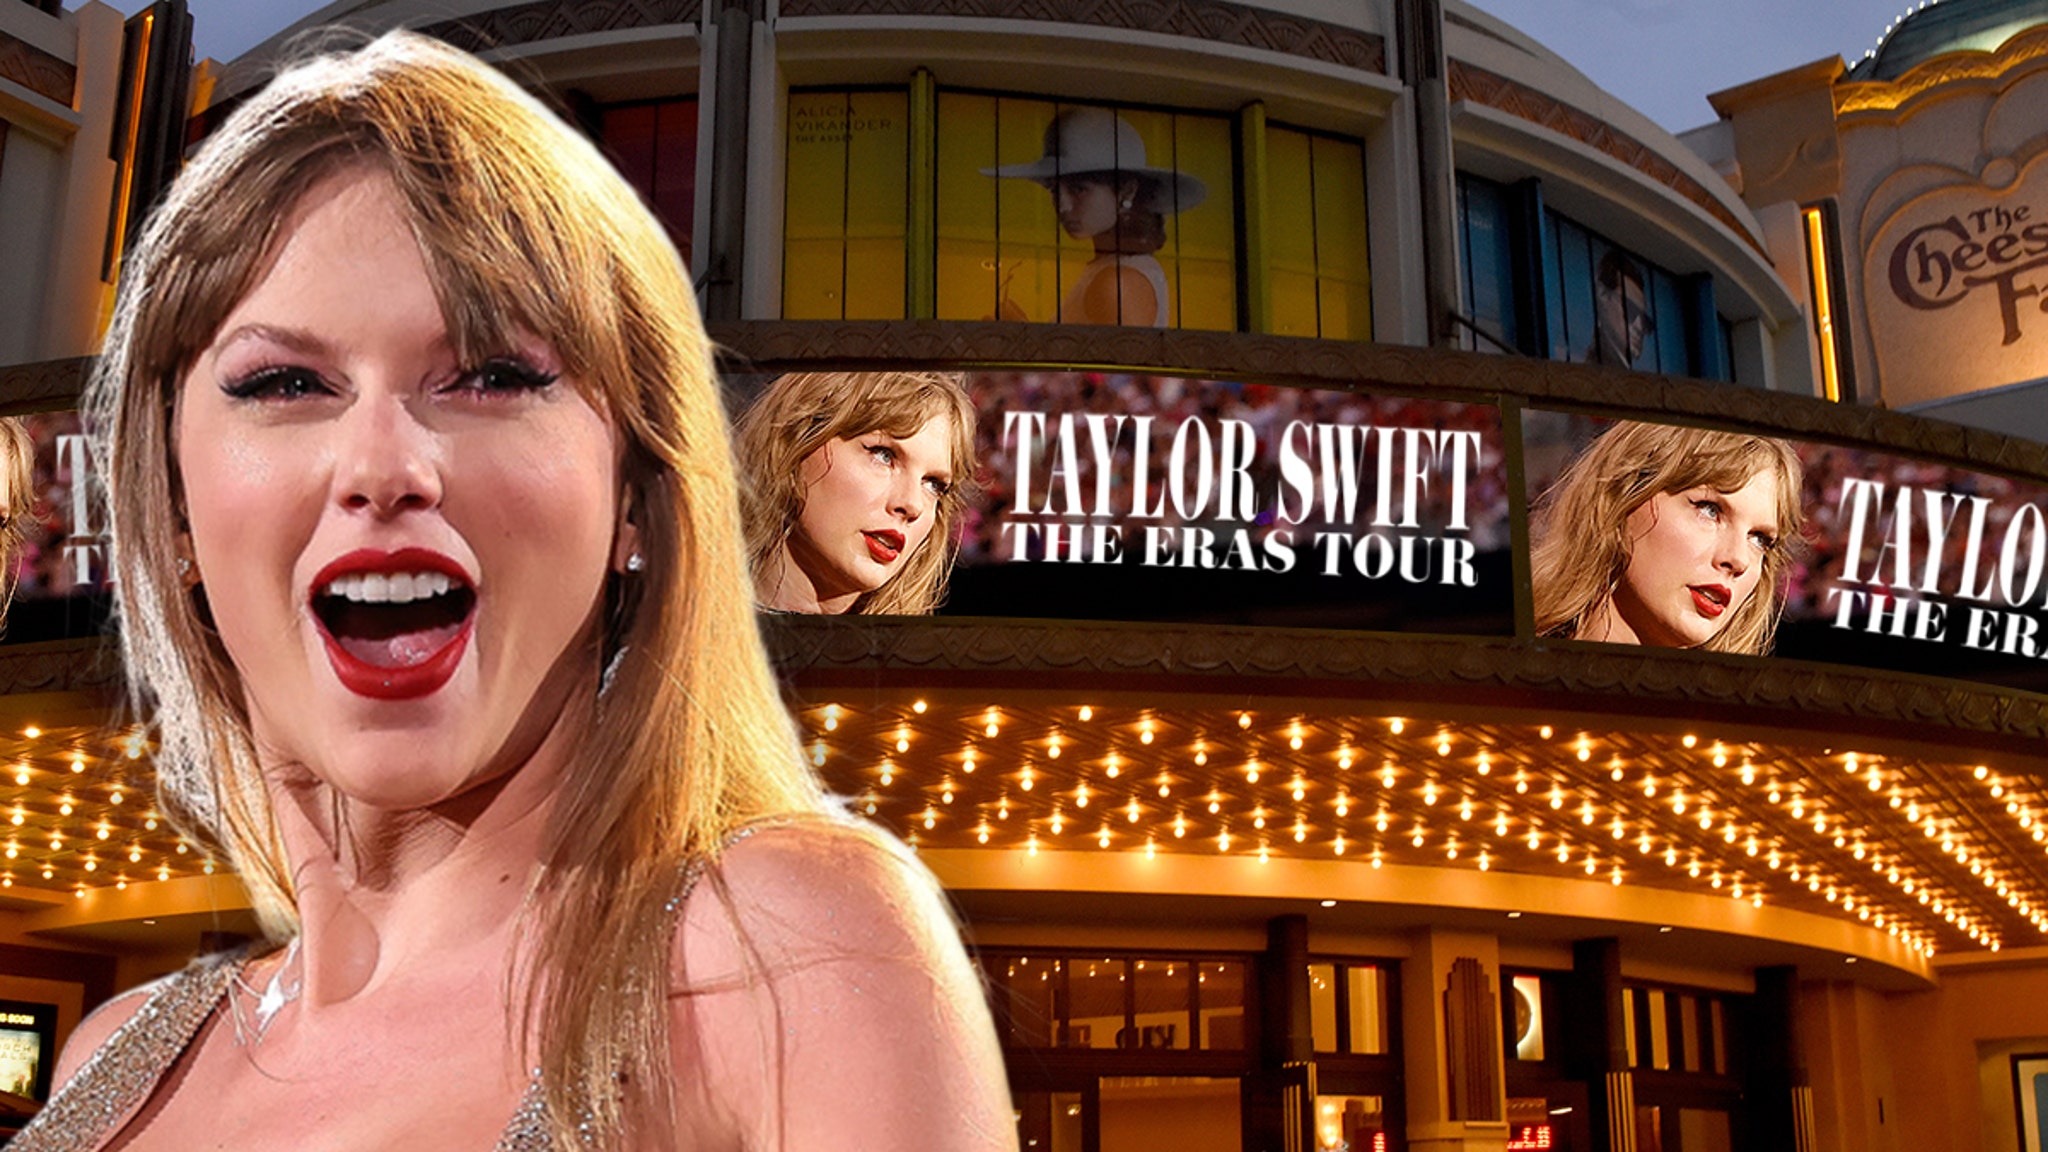 Taylor Swift’s “Eras Tour” premieres Wednesday at The Grove in Los Angeles